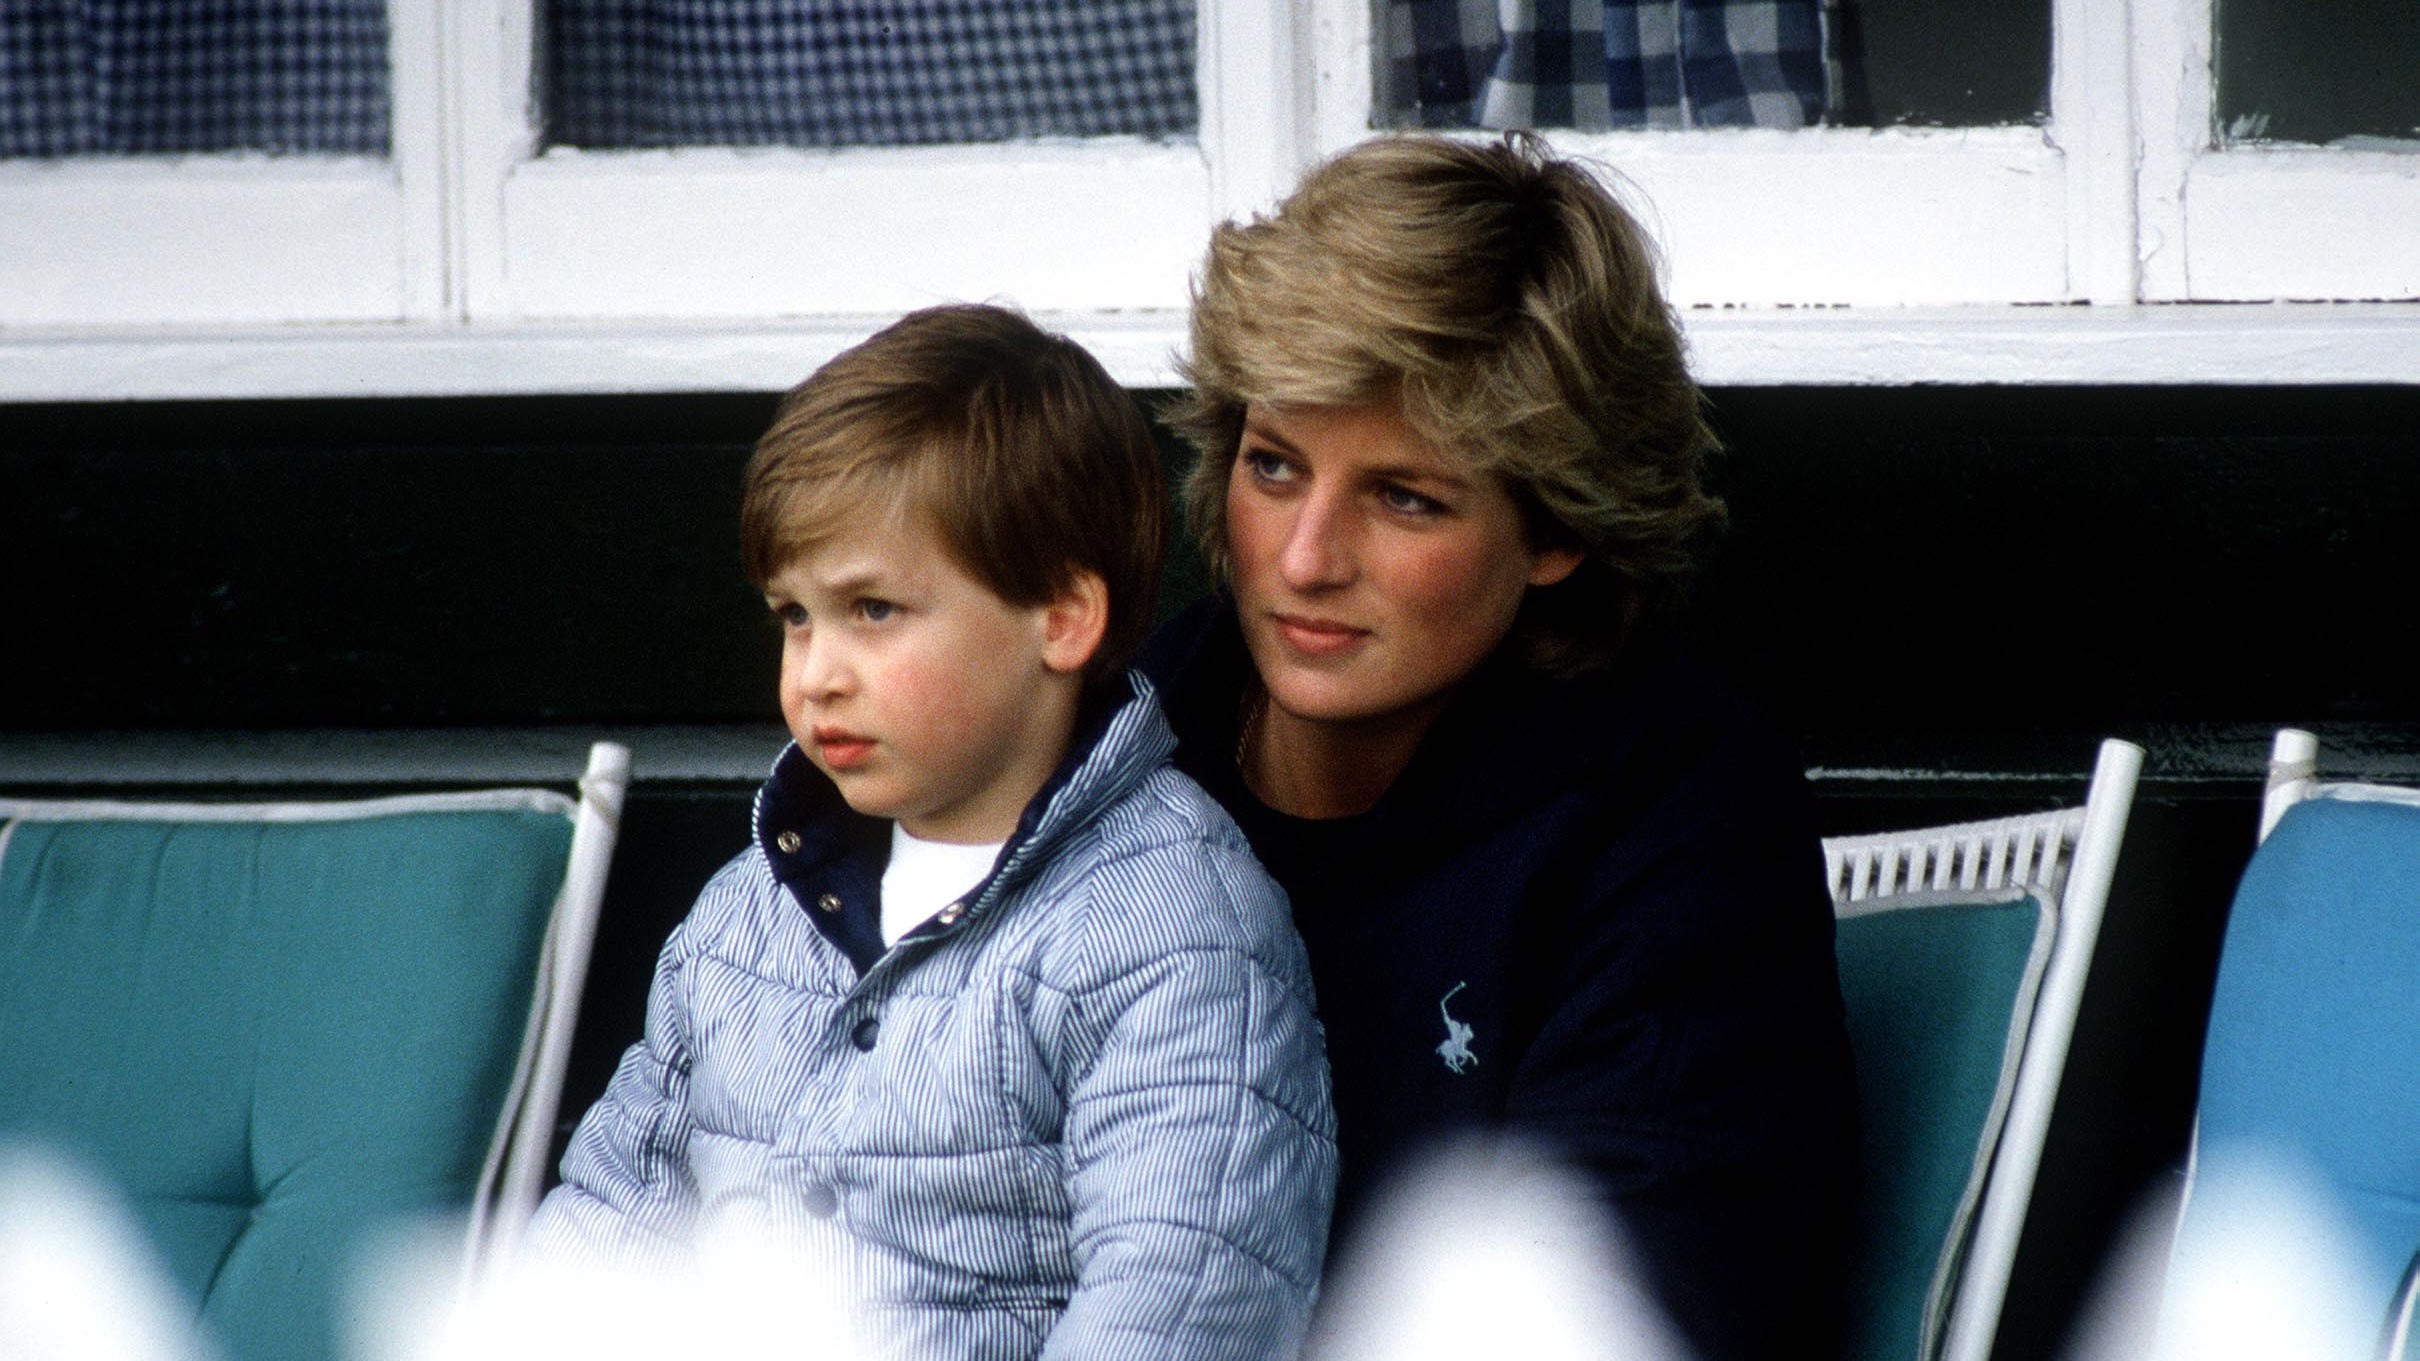 Prince William Comforted a Boy Who Lost His Mom, Said It "Gets Easier"